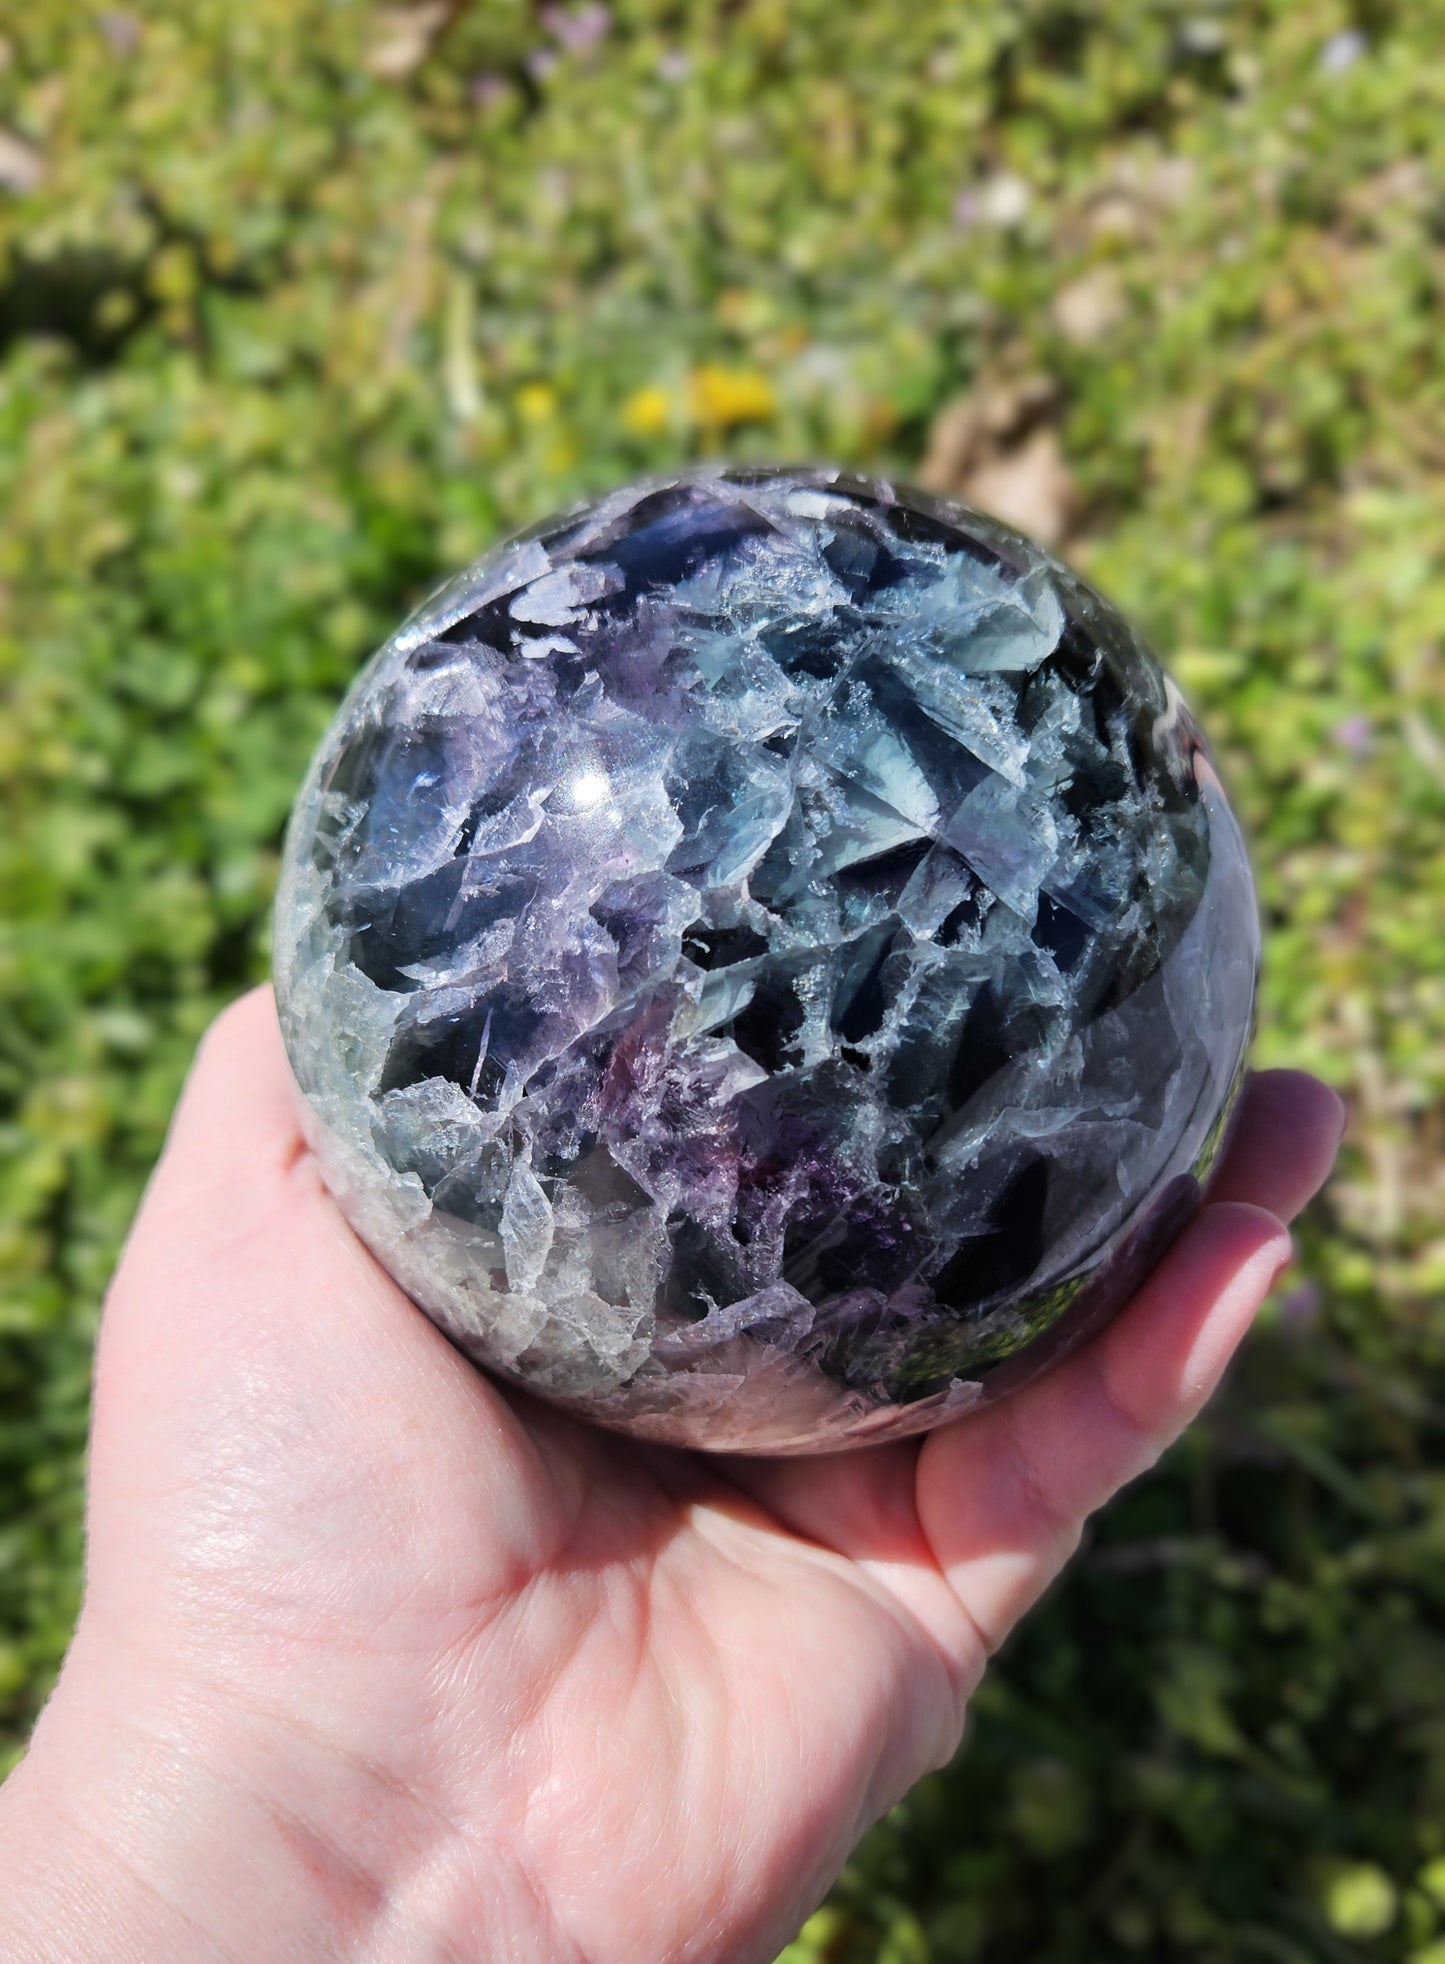 Teal & Purple Feather Flourite Sphere 101mm With Rainbows and free sphere stand